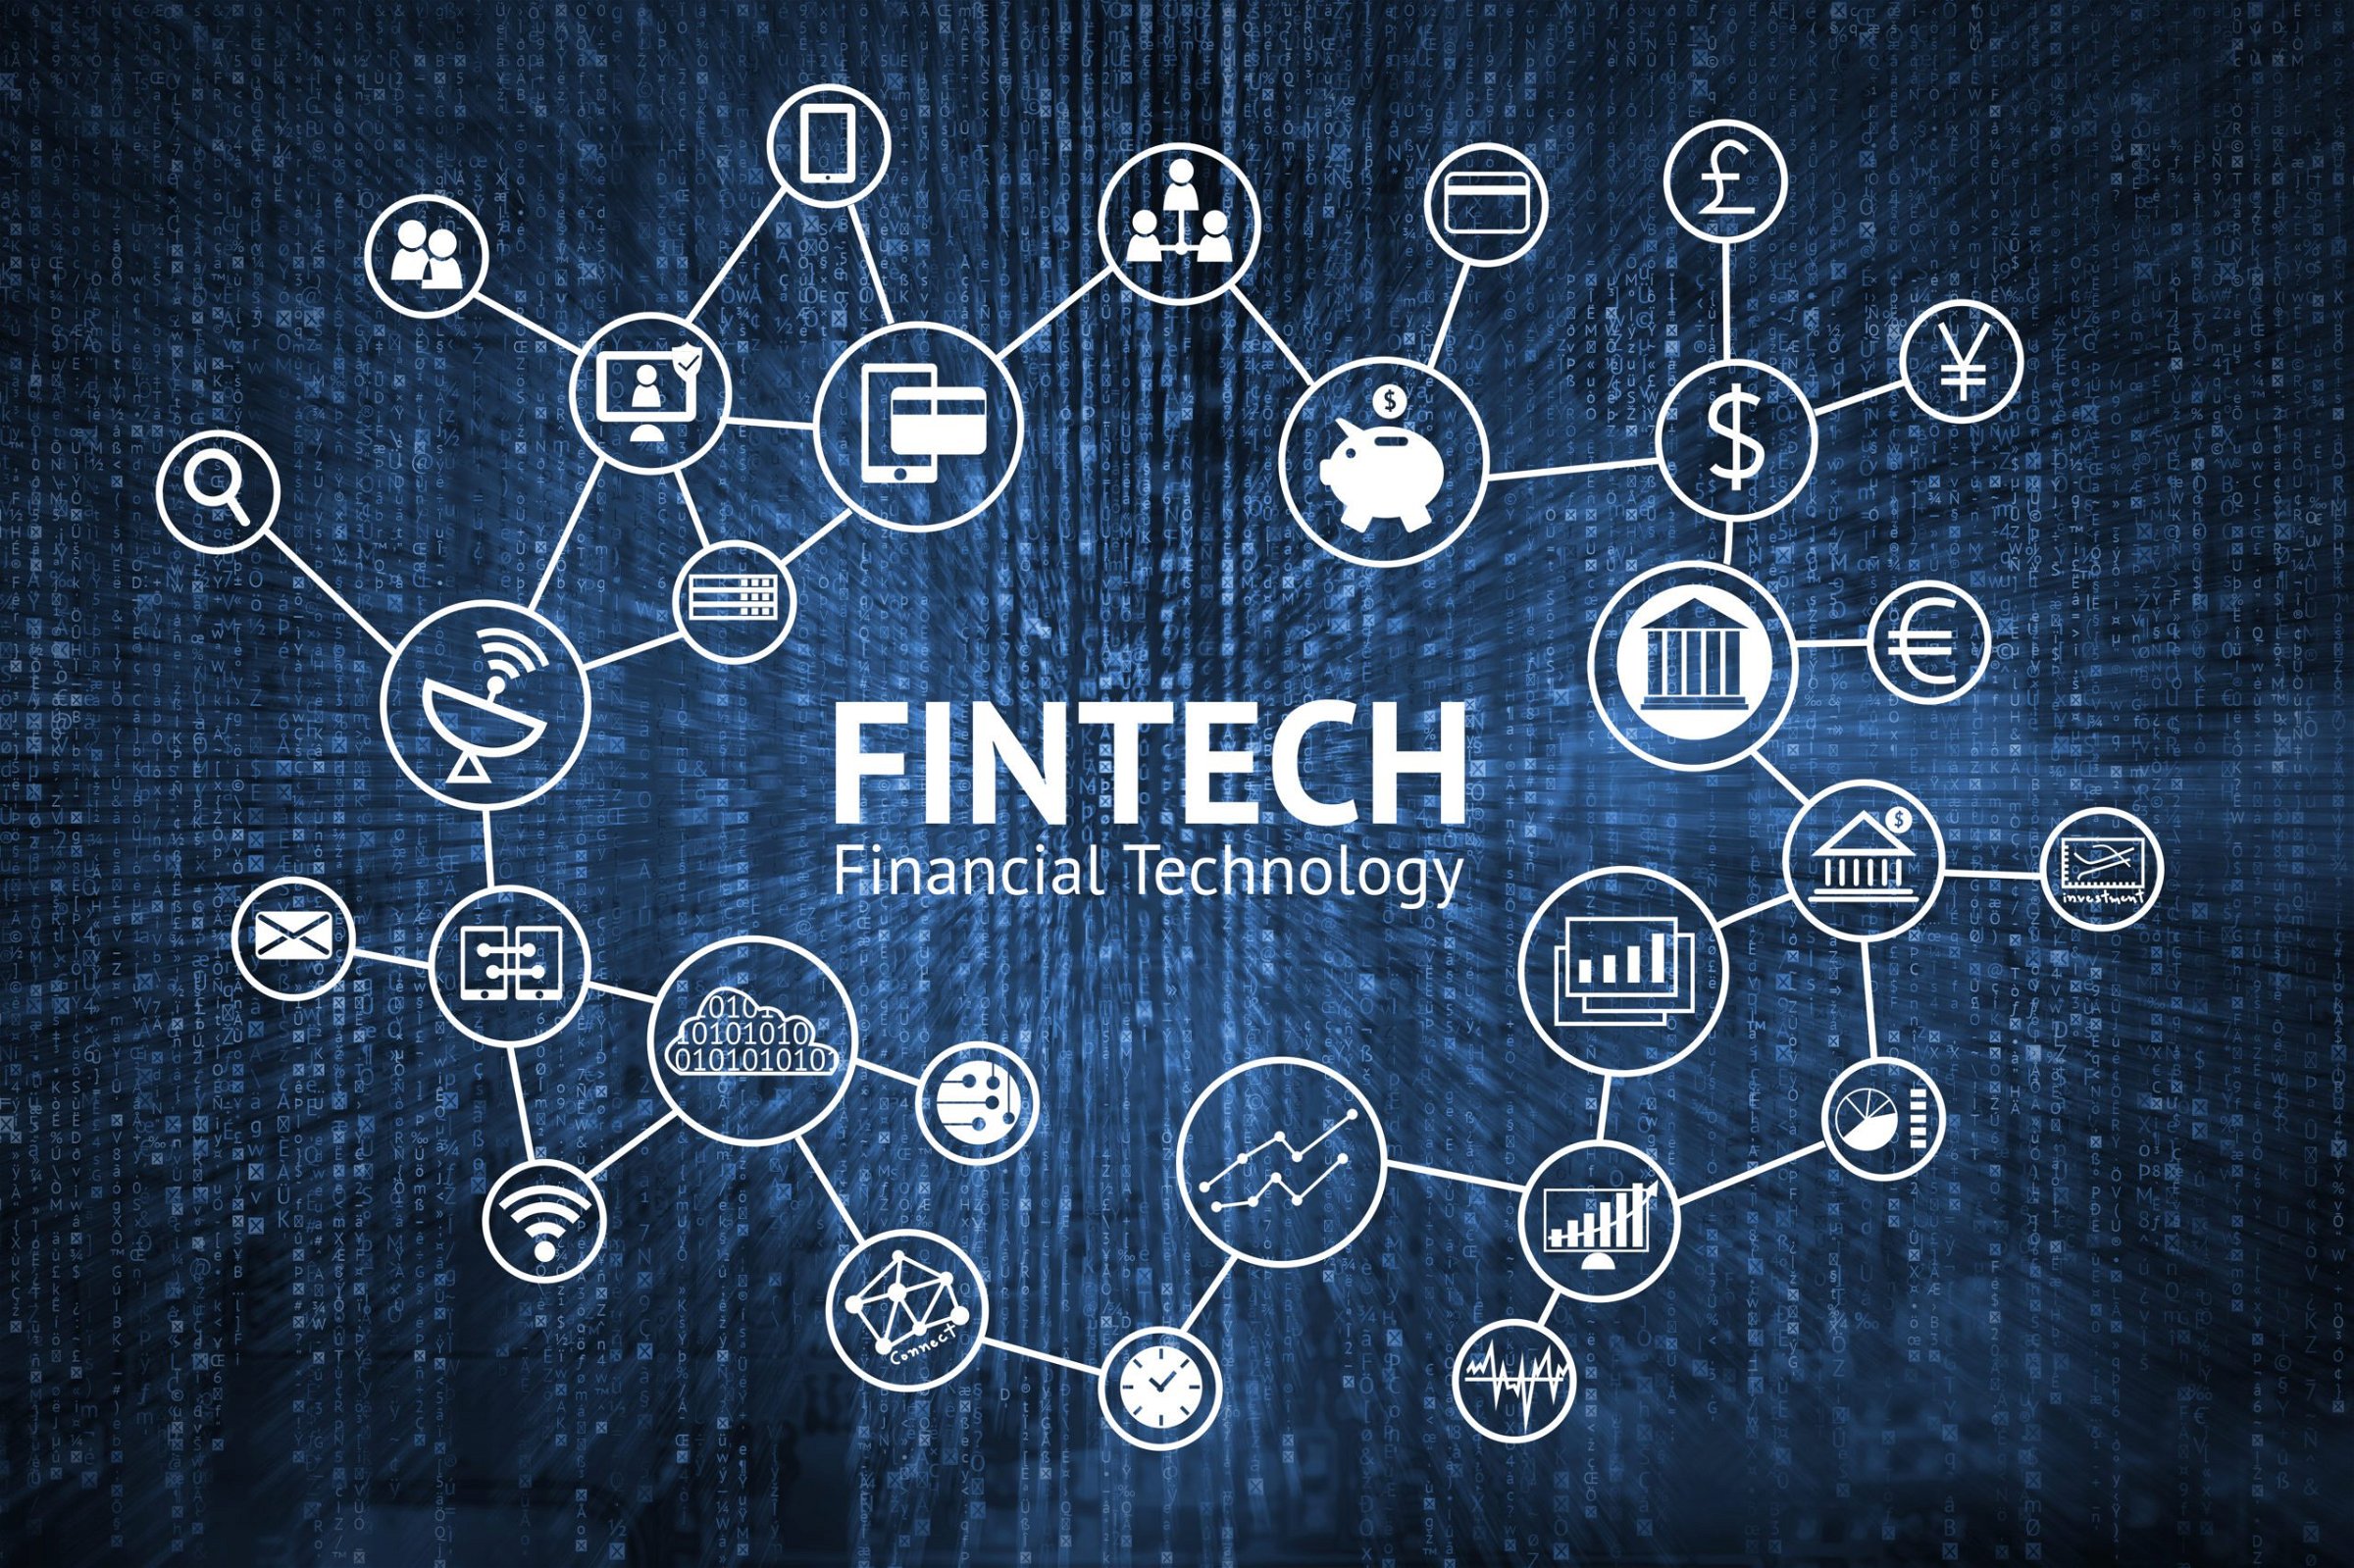 Why Do You Want To Join Fintech?